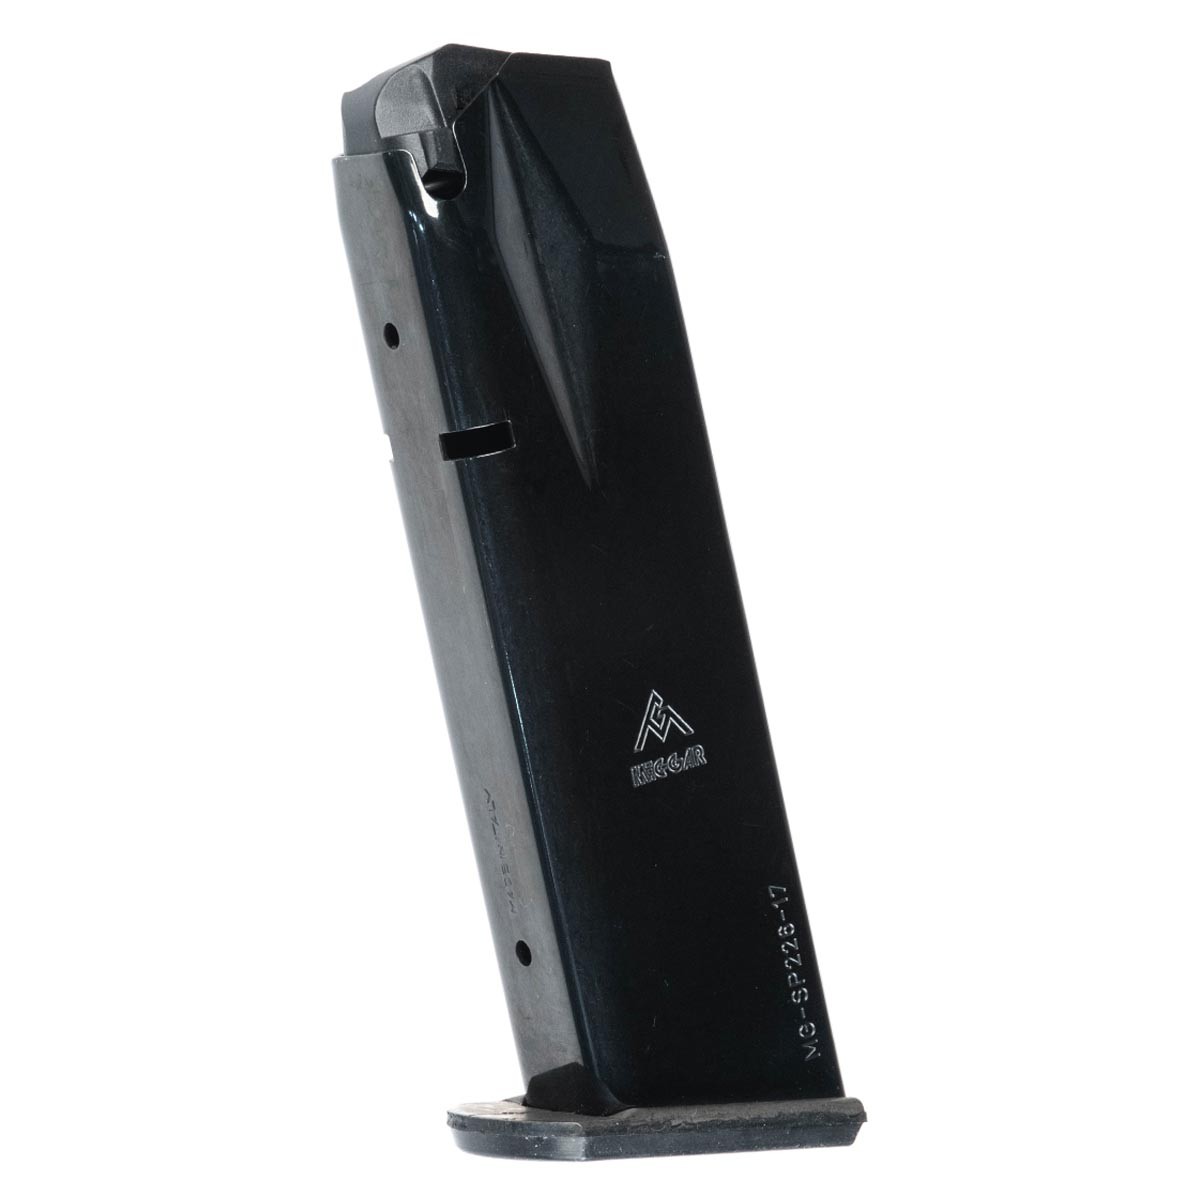 SIG SAUER P226 17 RD 9MM RUBBER PAD OEM FACTORY MAGAZINE MAG-226-9-17 - Click Image to Close